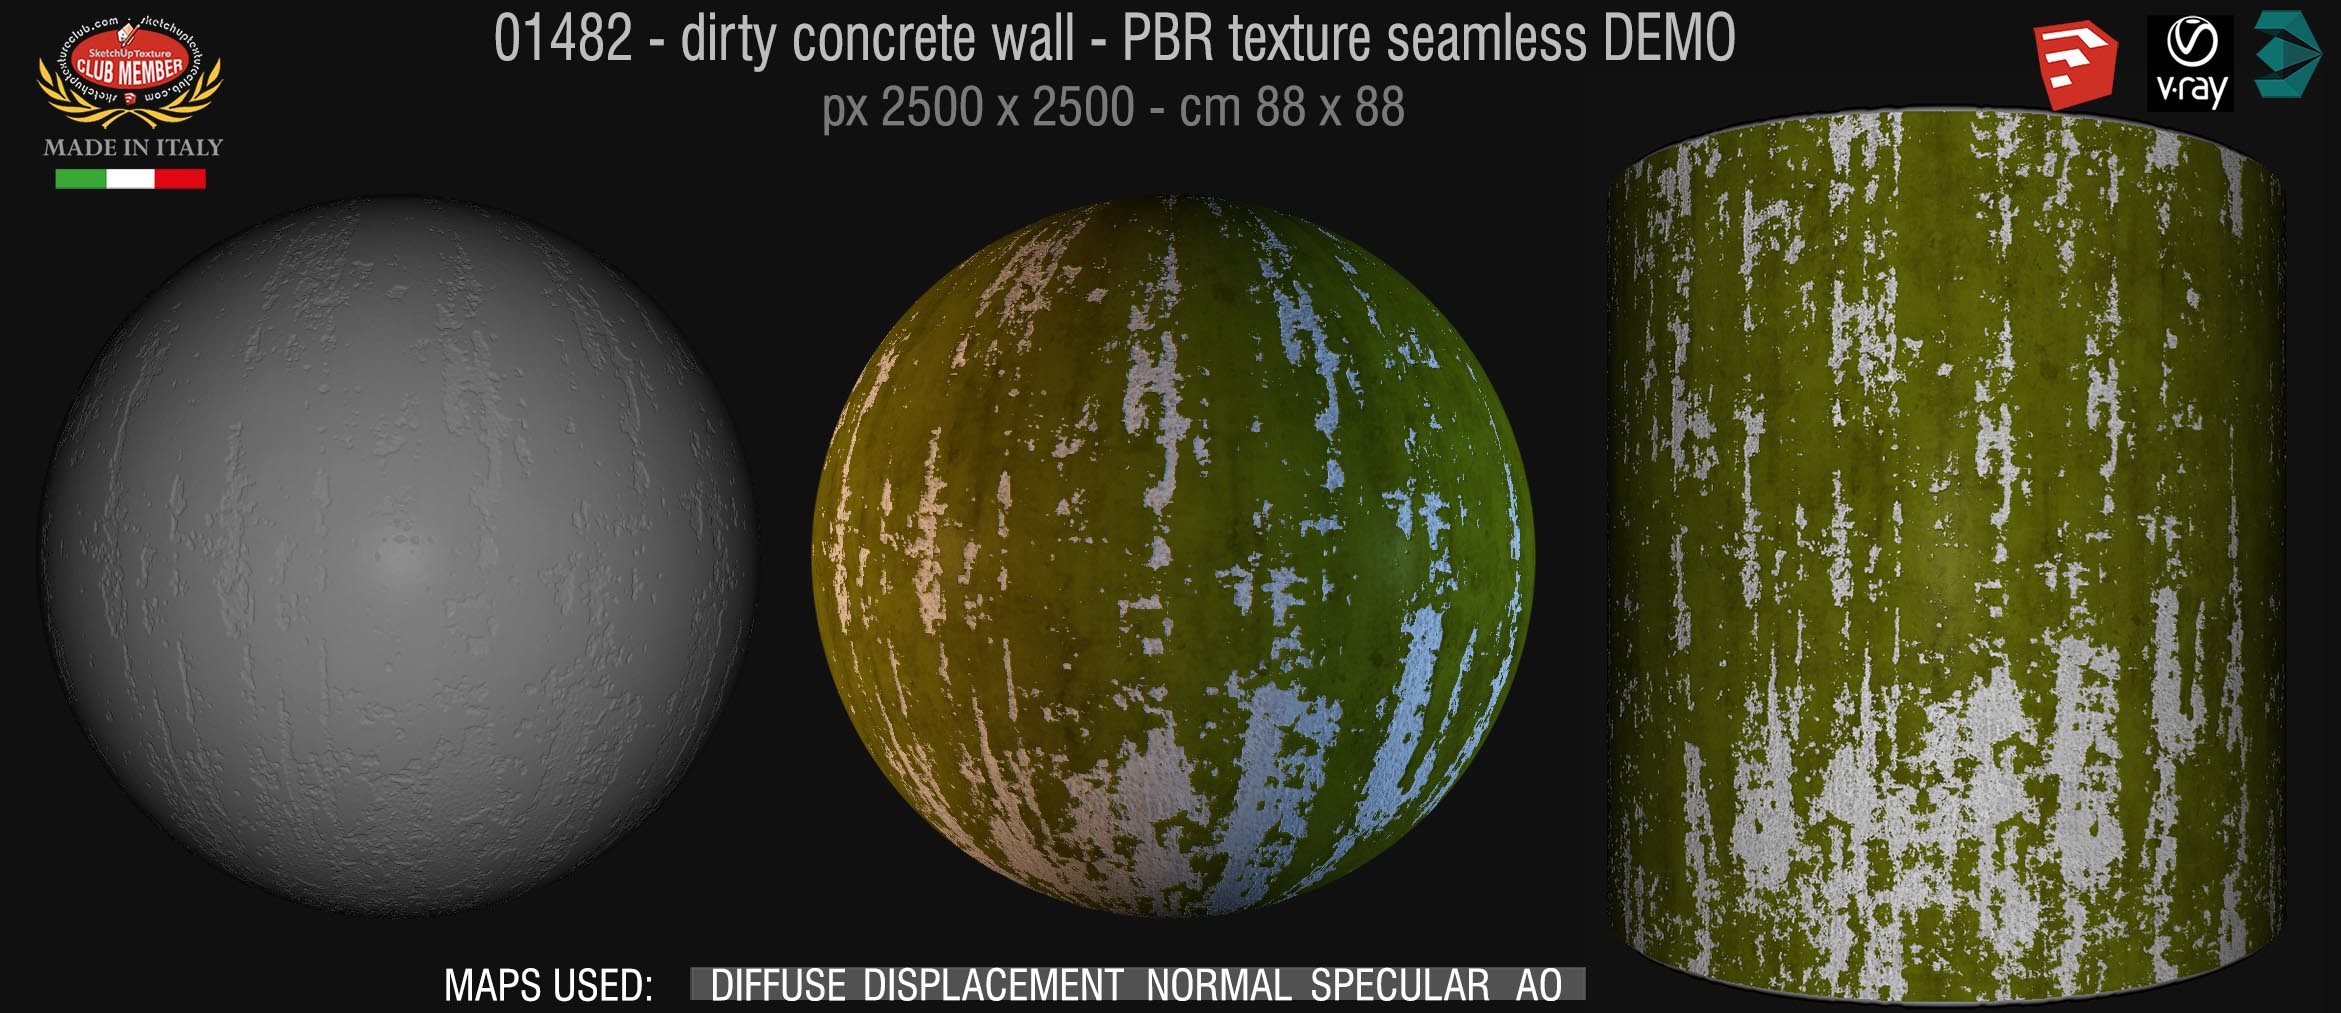 01482 Concrete bare dirty wall PBR texture seamless DEMO